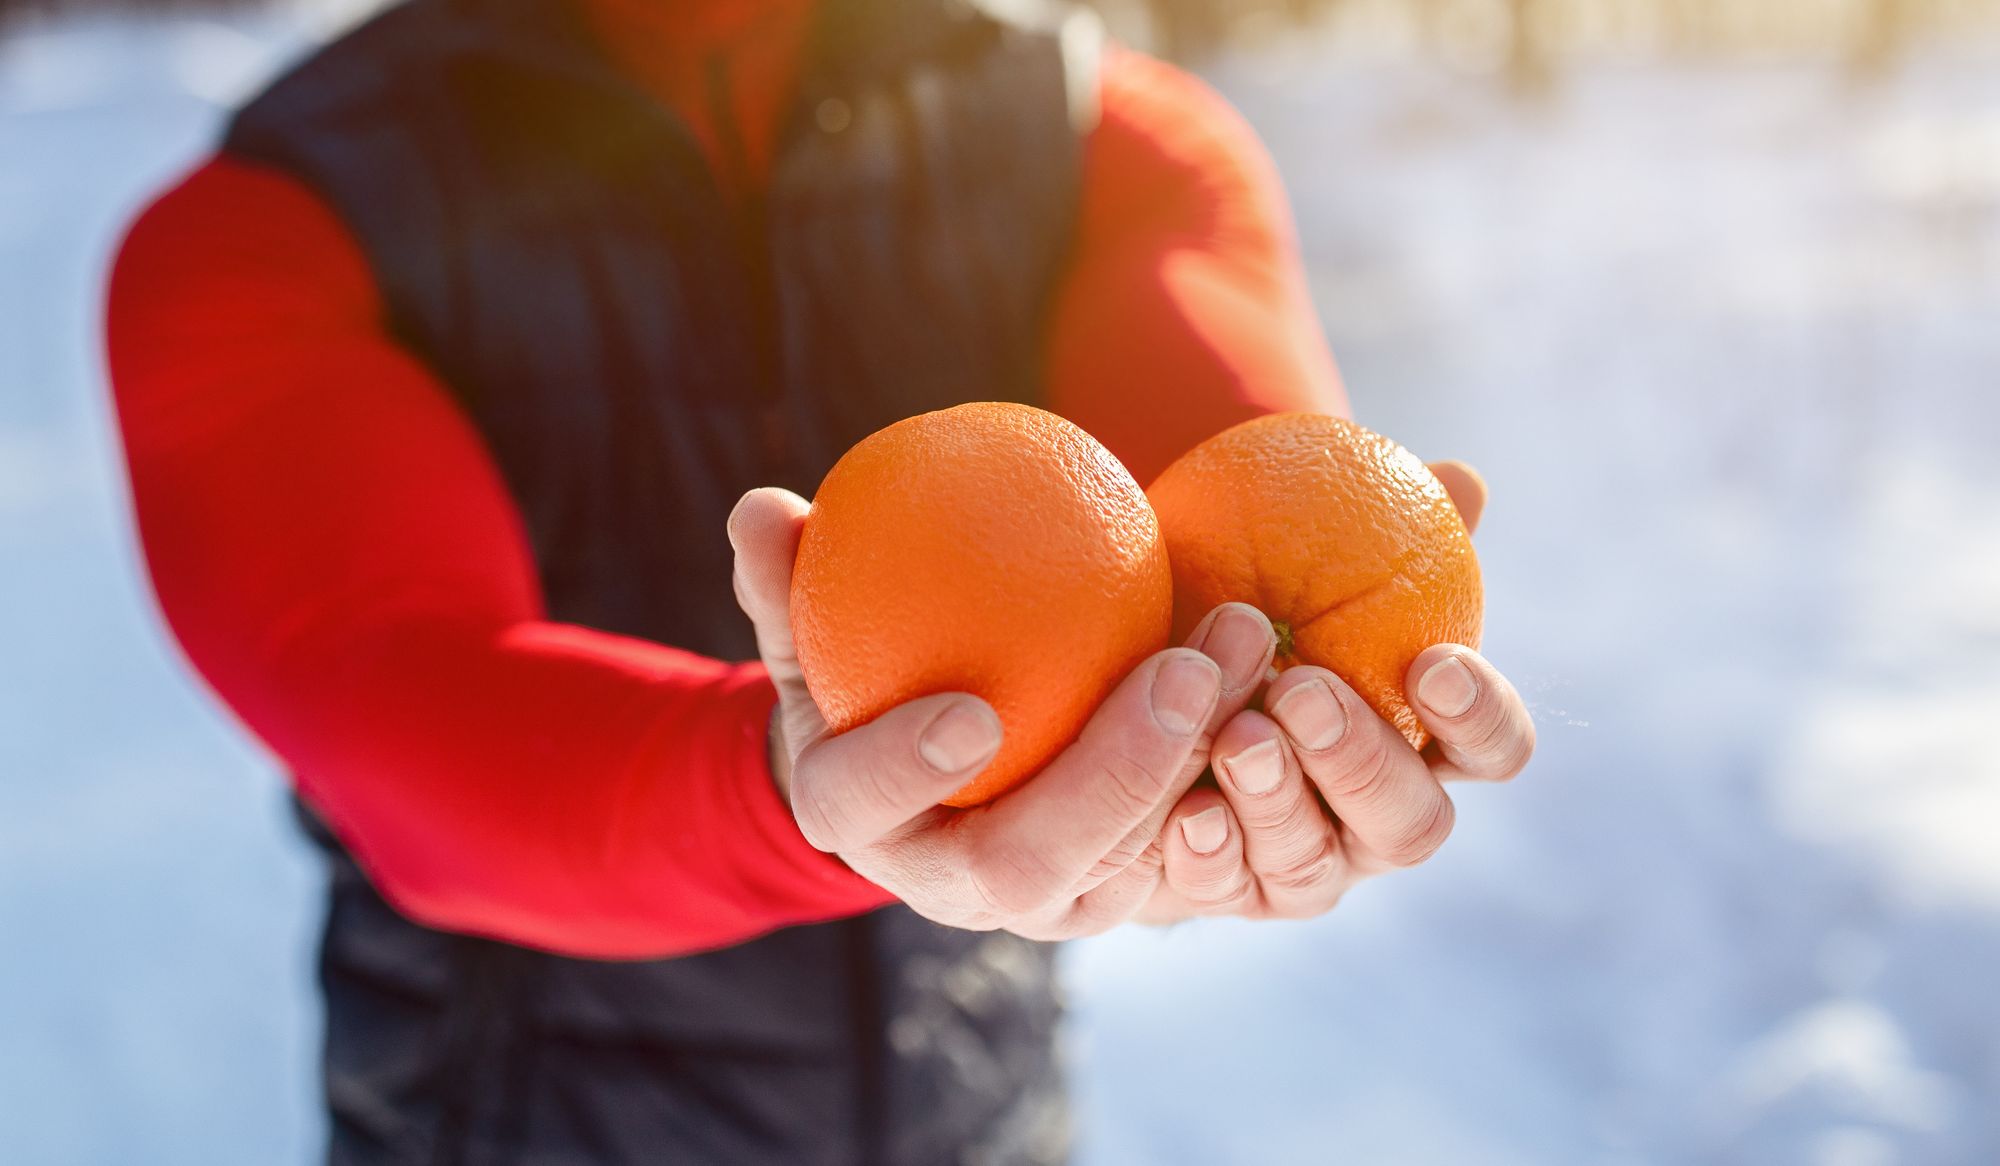 Closeup of fit mature man holding oranges as healthy snack after morning workout at snowy winter